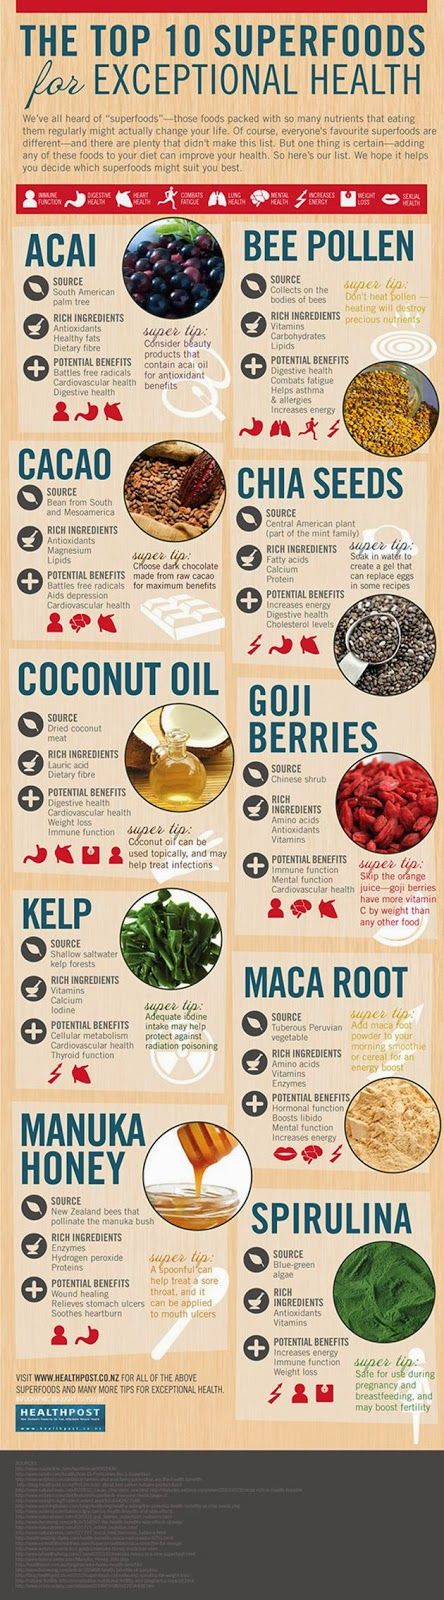 10 Superfoods You Should Be Eating Weekly - Thedailypositive.com